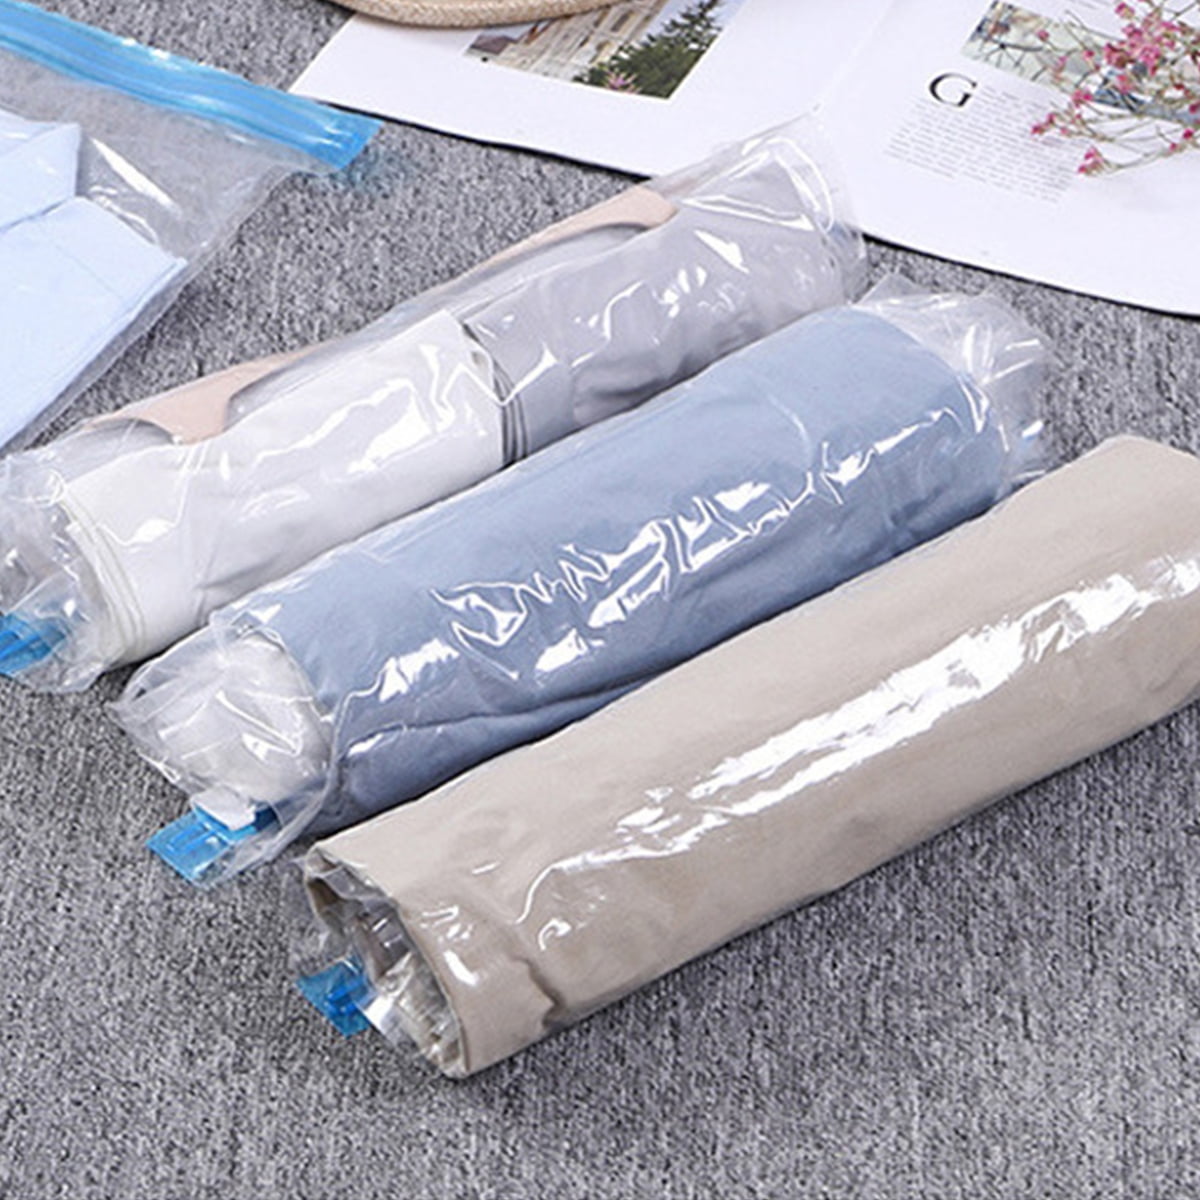 Travel Compression Bags for Travel, Camping and Storage,Roll Up Reusable  Travel Space Saver Vacuum Storage Bags, No Vacuum or Pump Needed,30x50cm